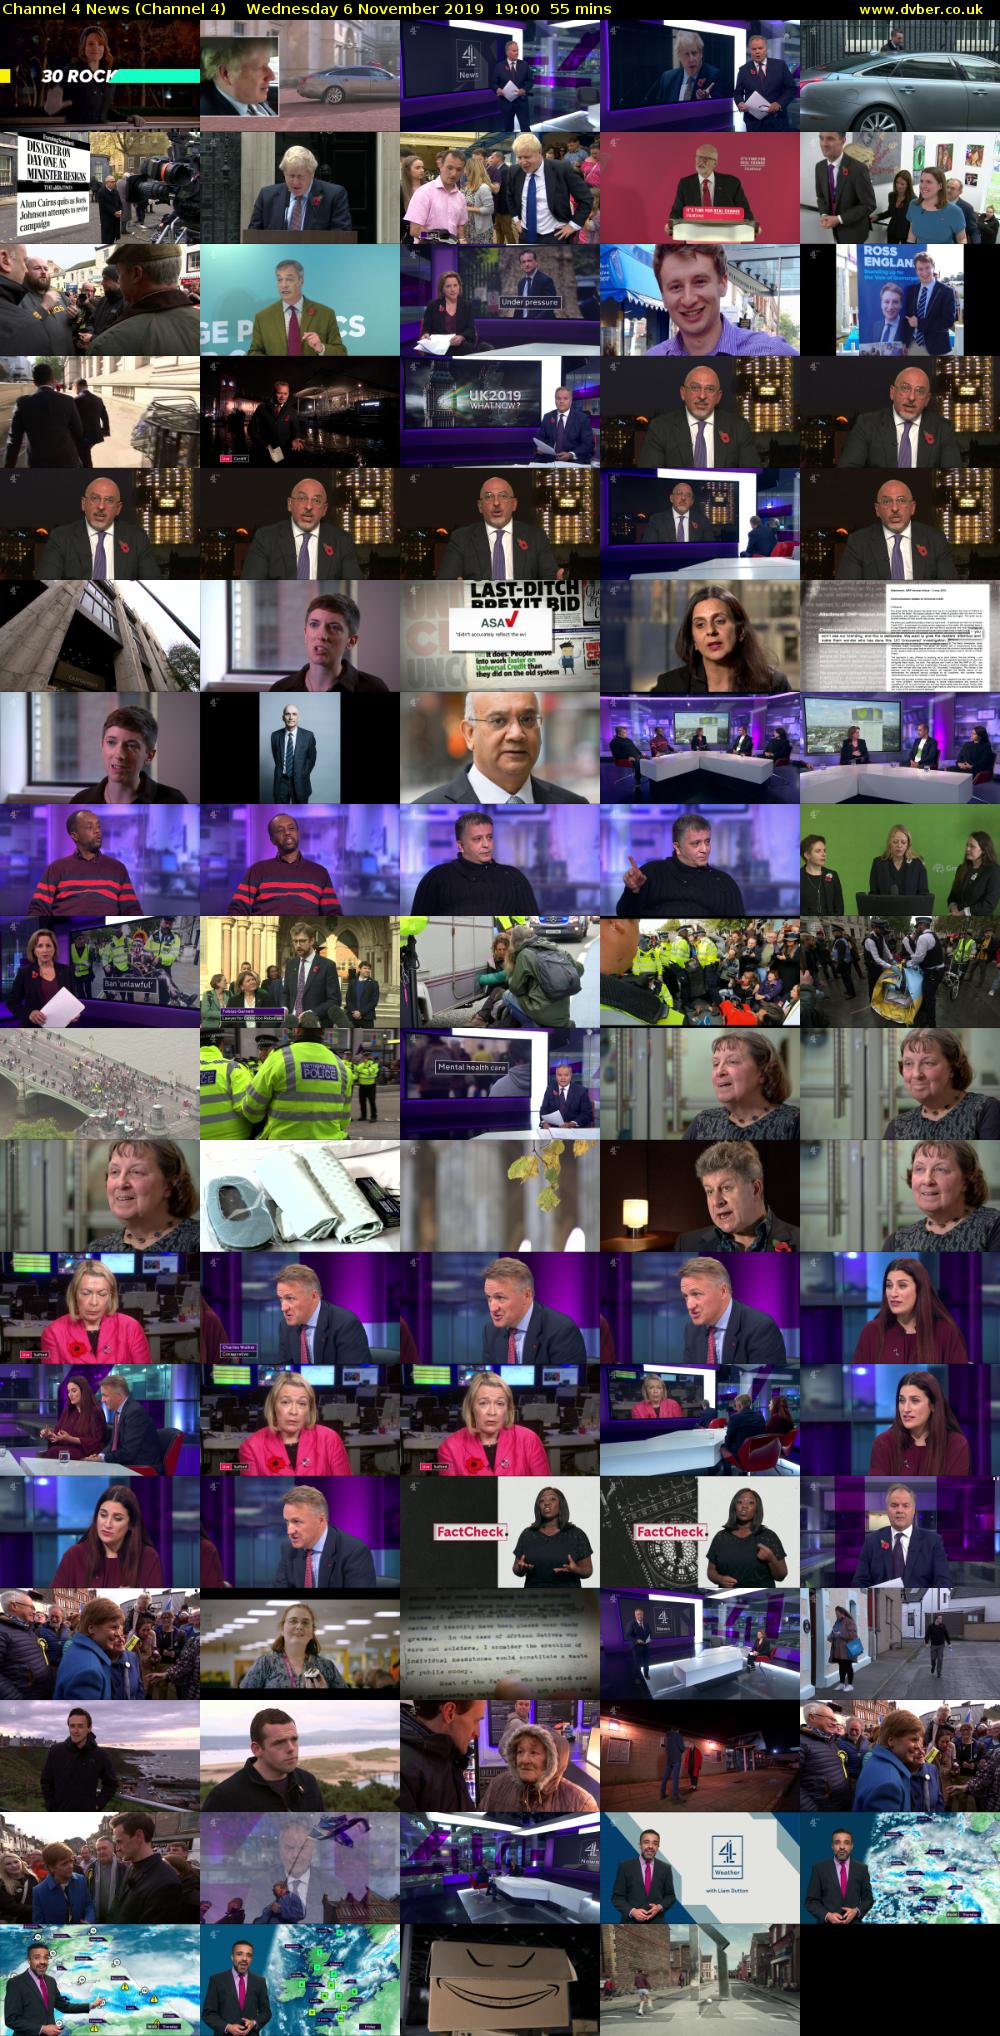 Channel 4 News (Channel 4) Wednesday 6 November 2019 19:00 - 19:55